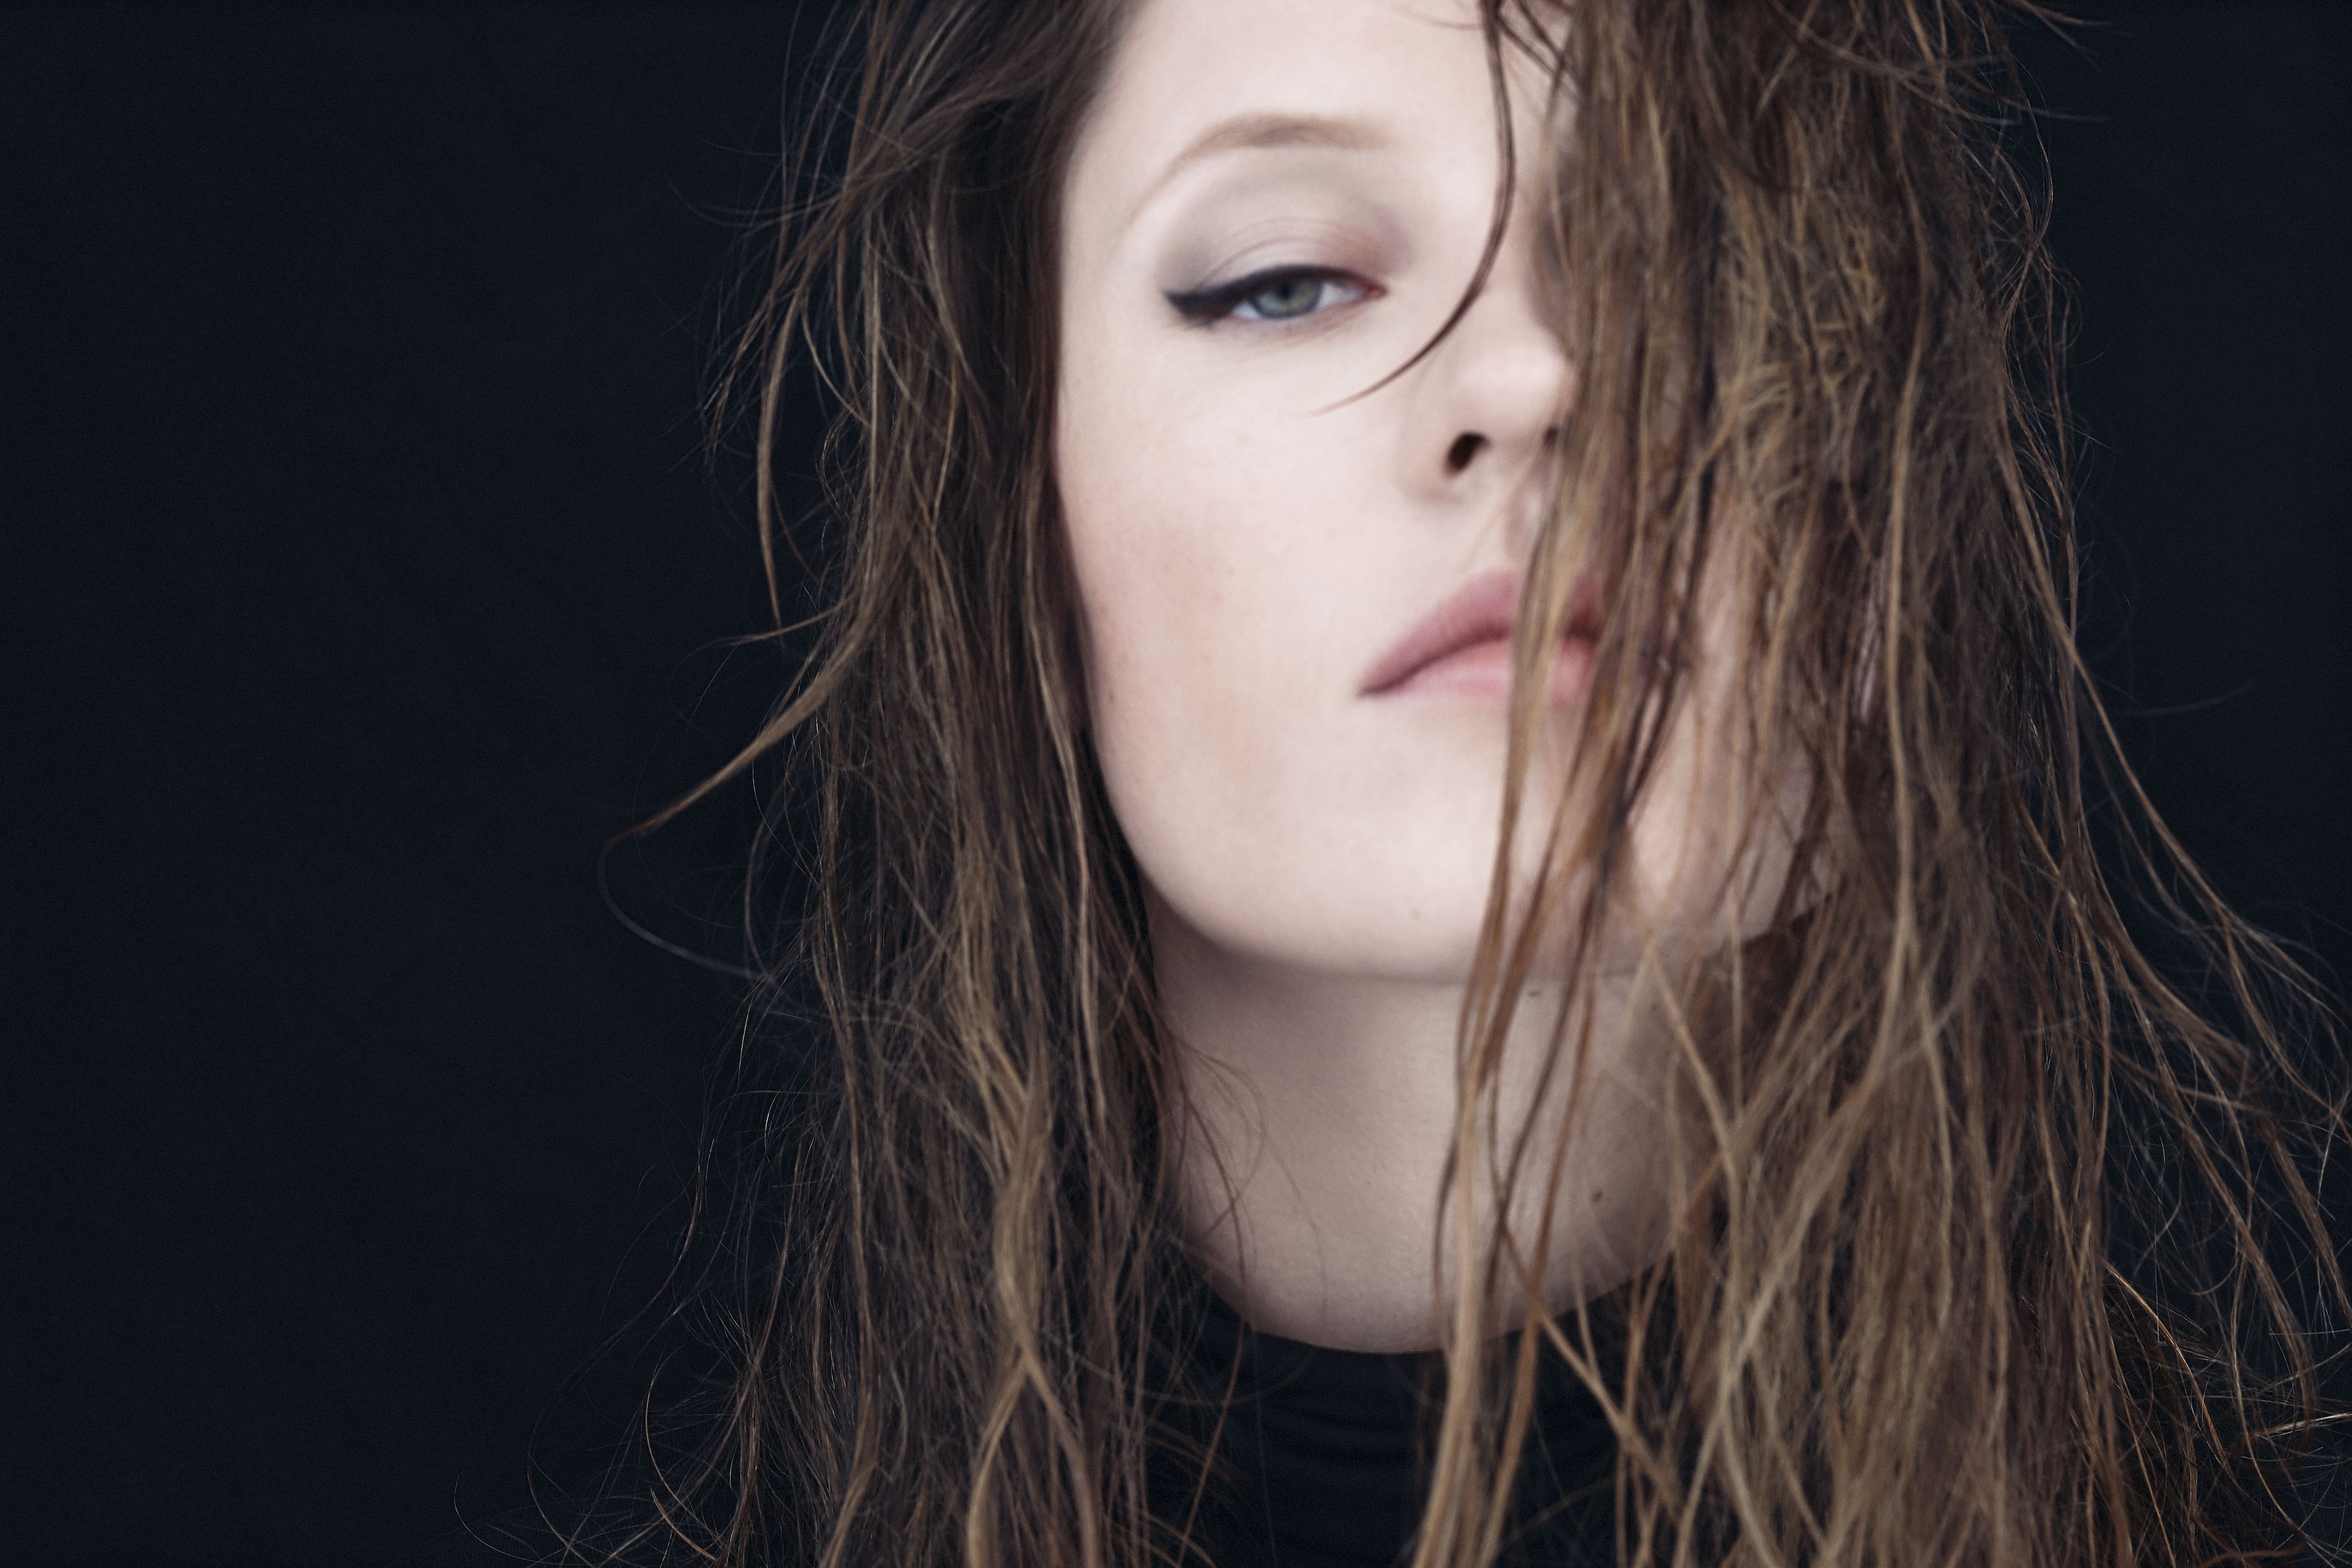 REBOOT presents Charlotte de Witte supported by Juemi